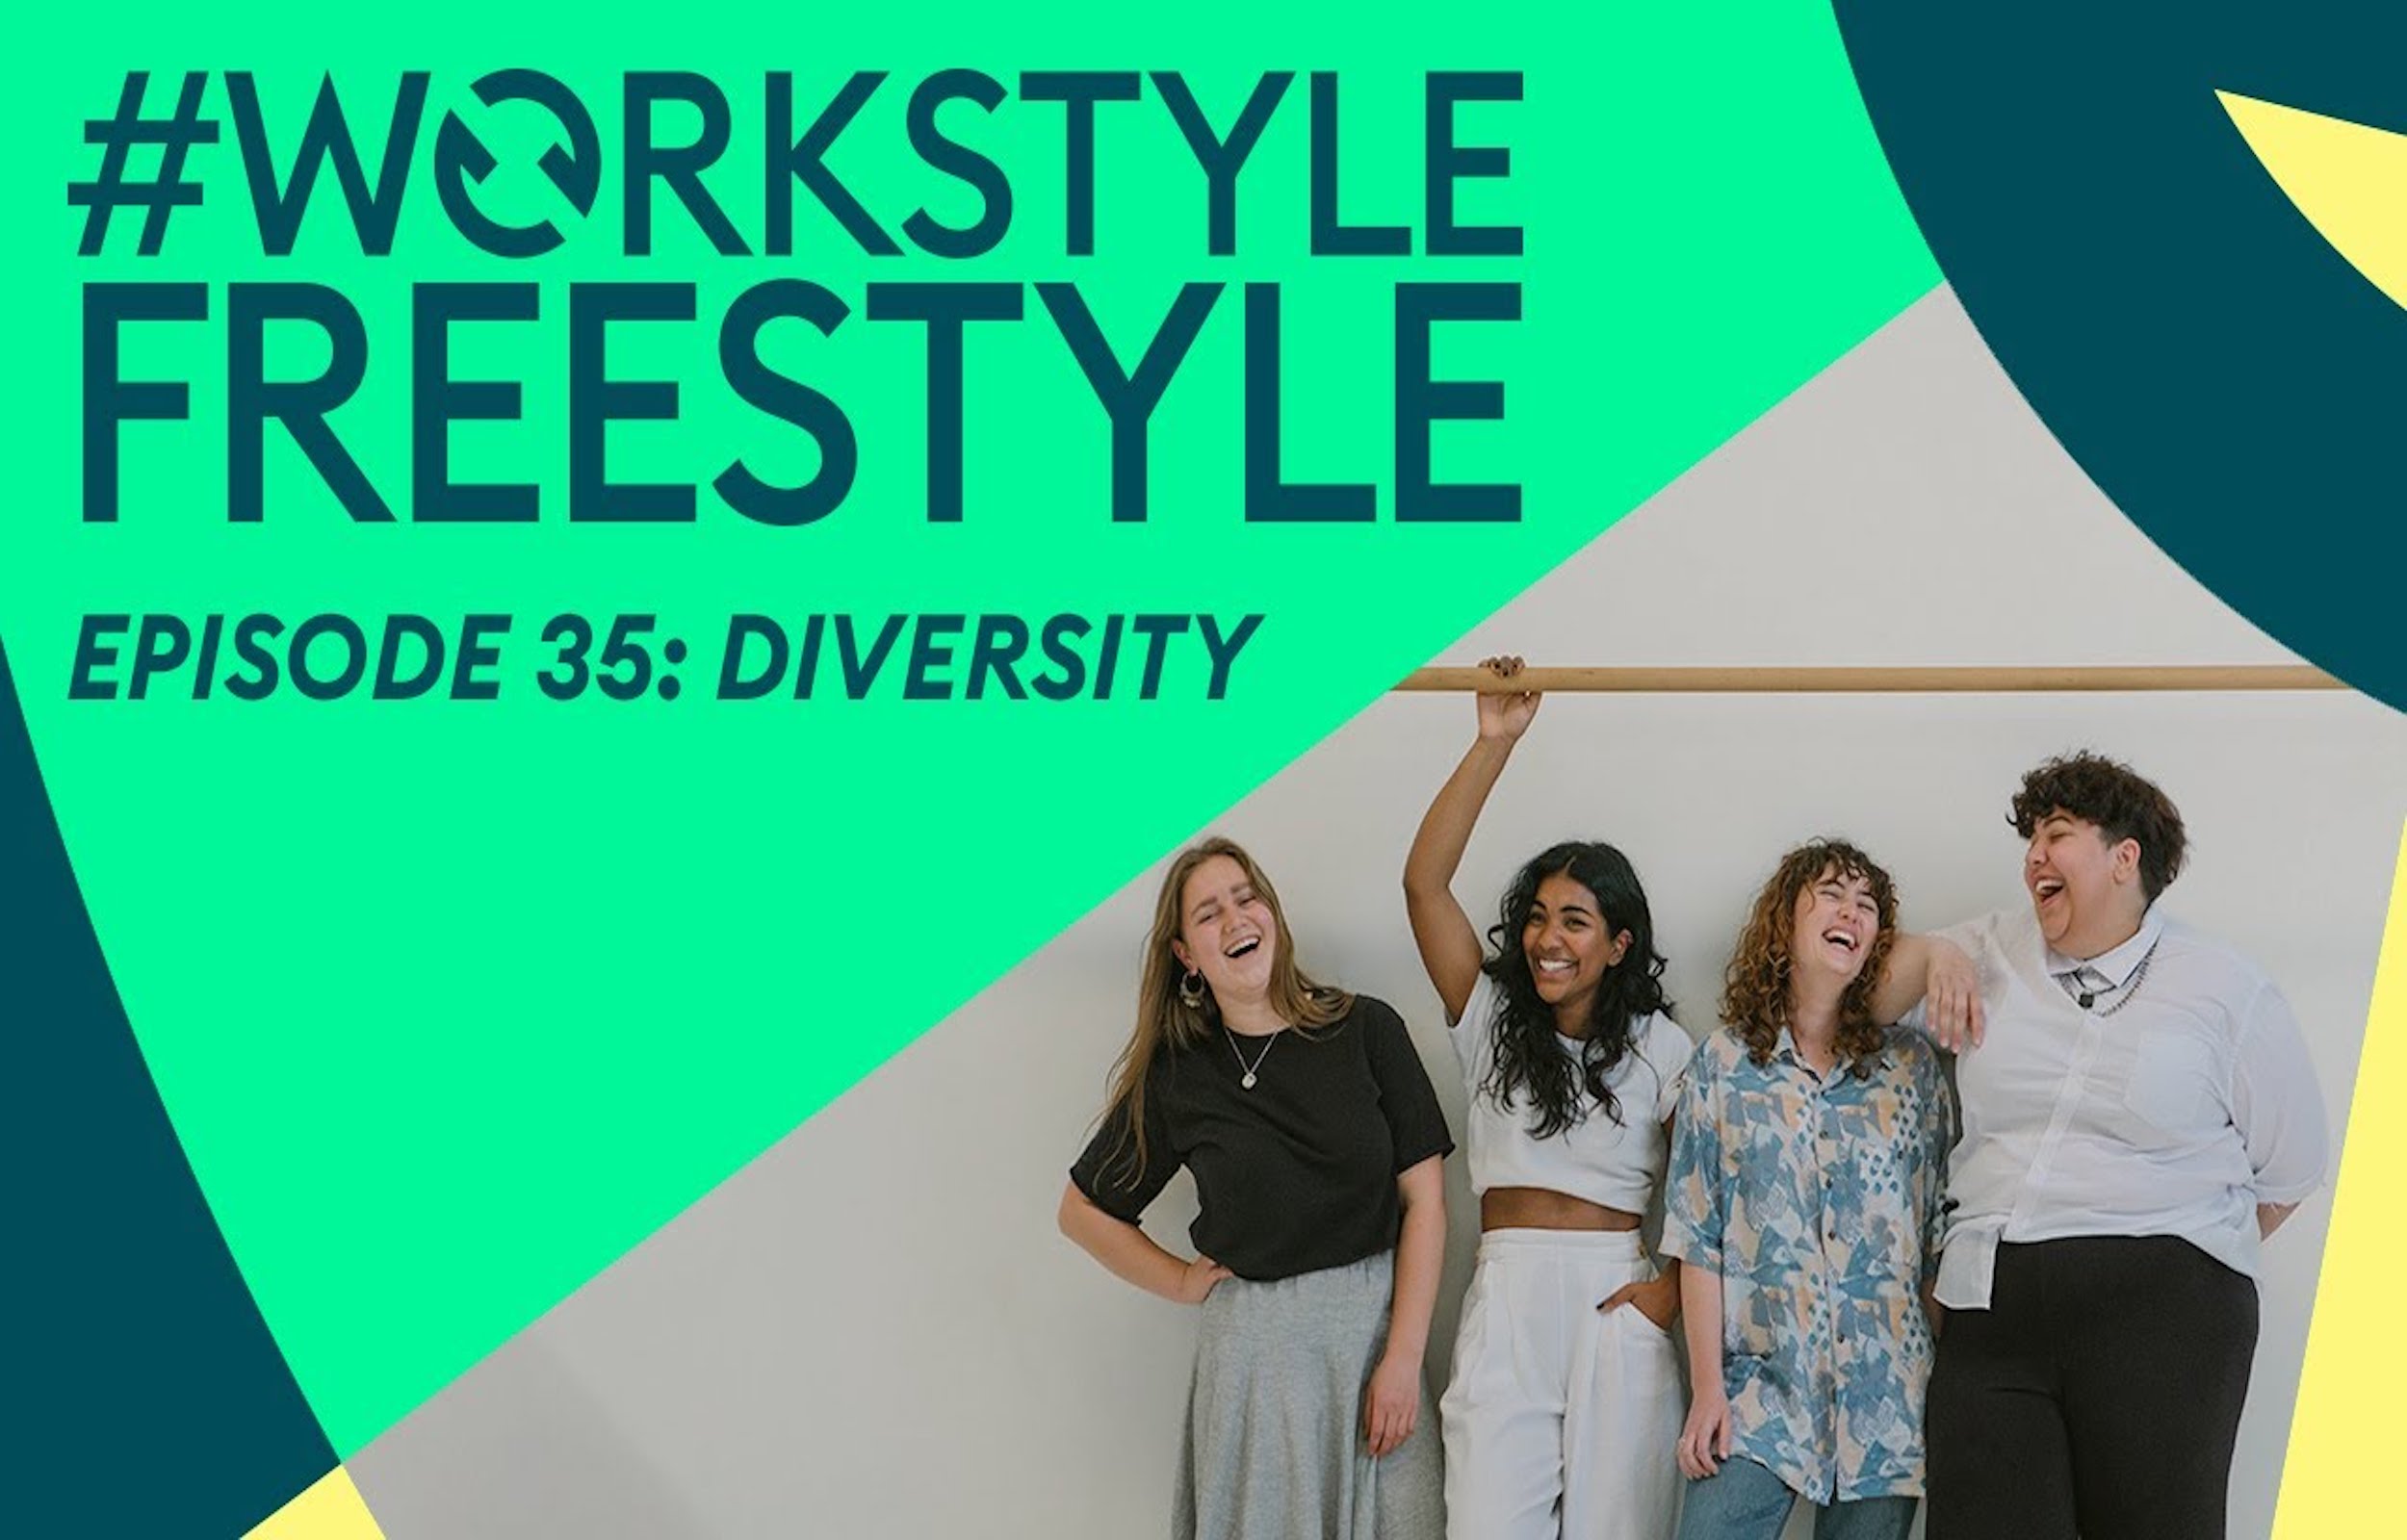 Workstyle Freestyle Diversity